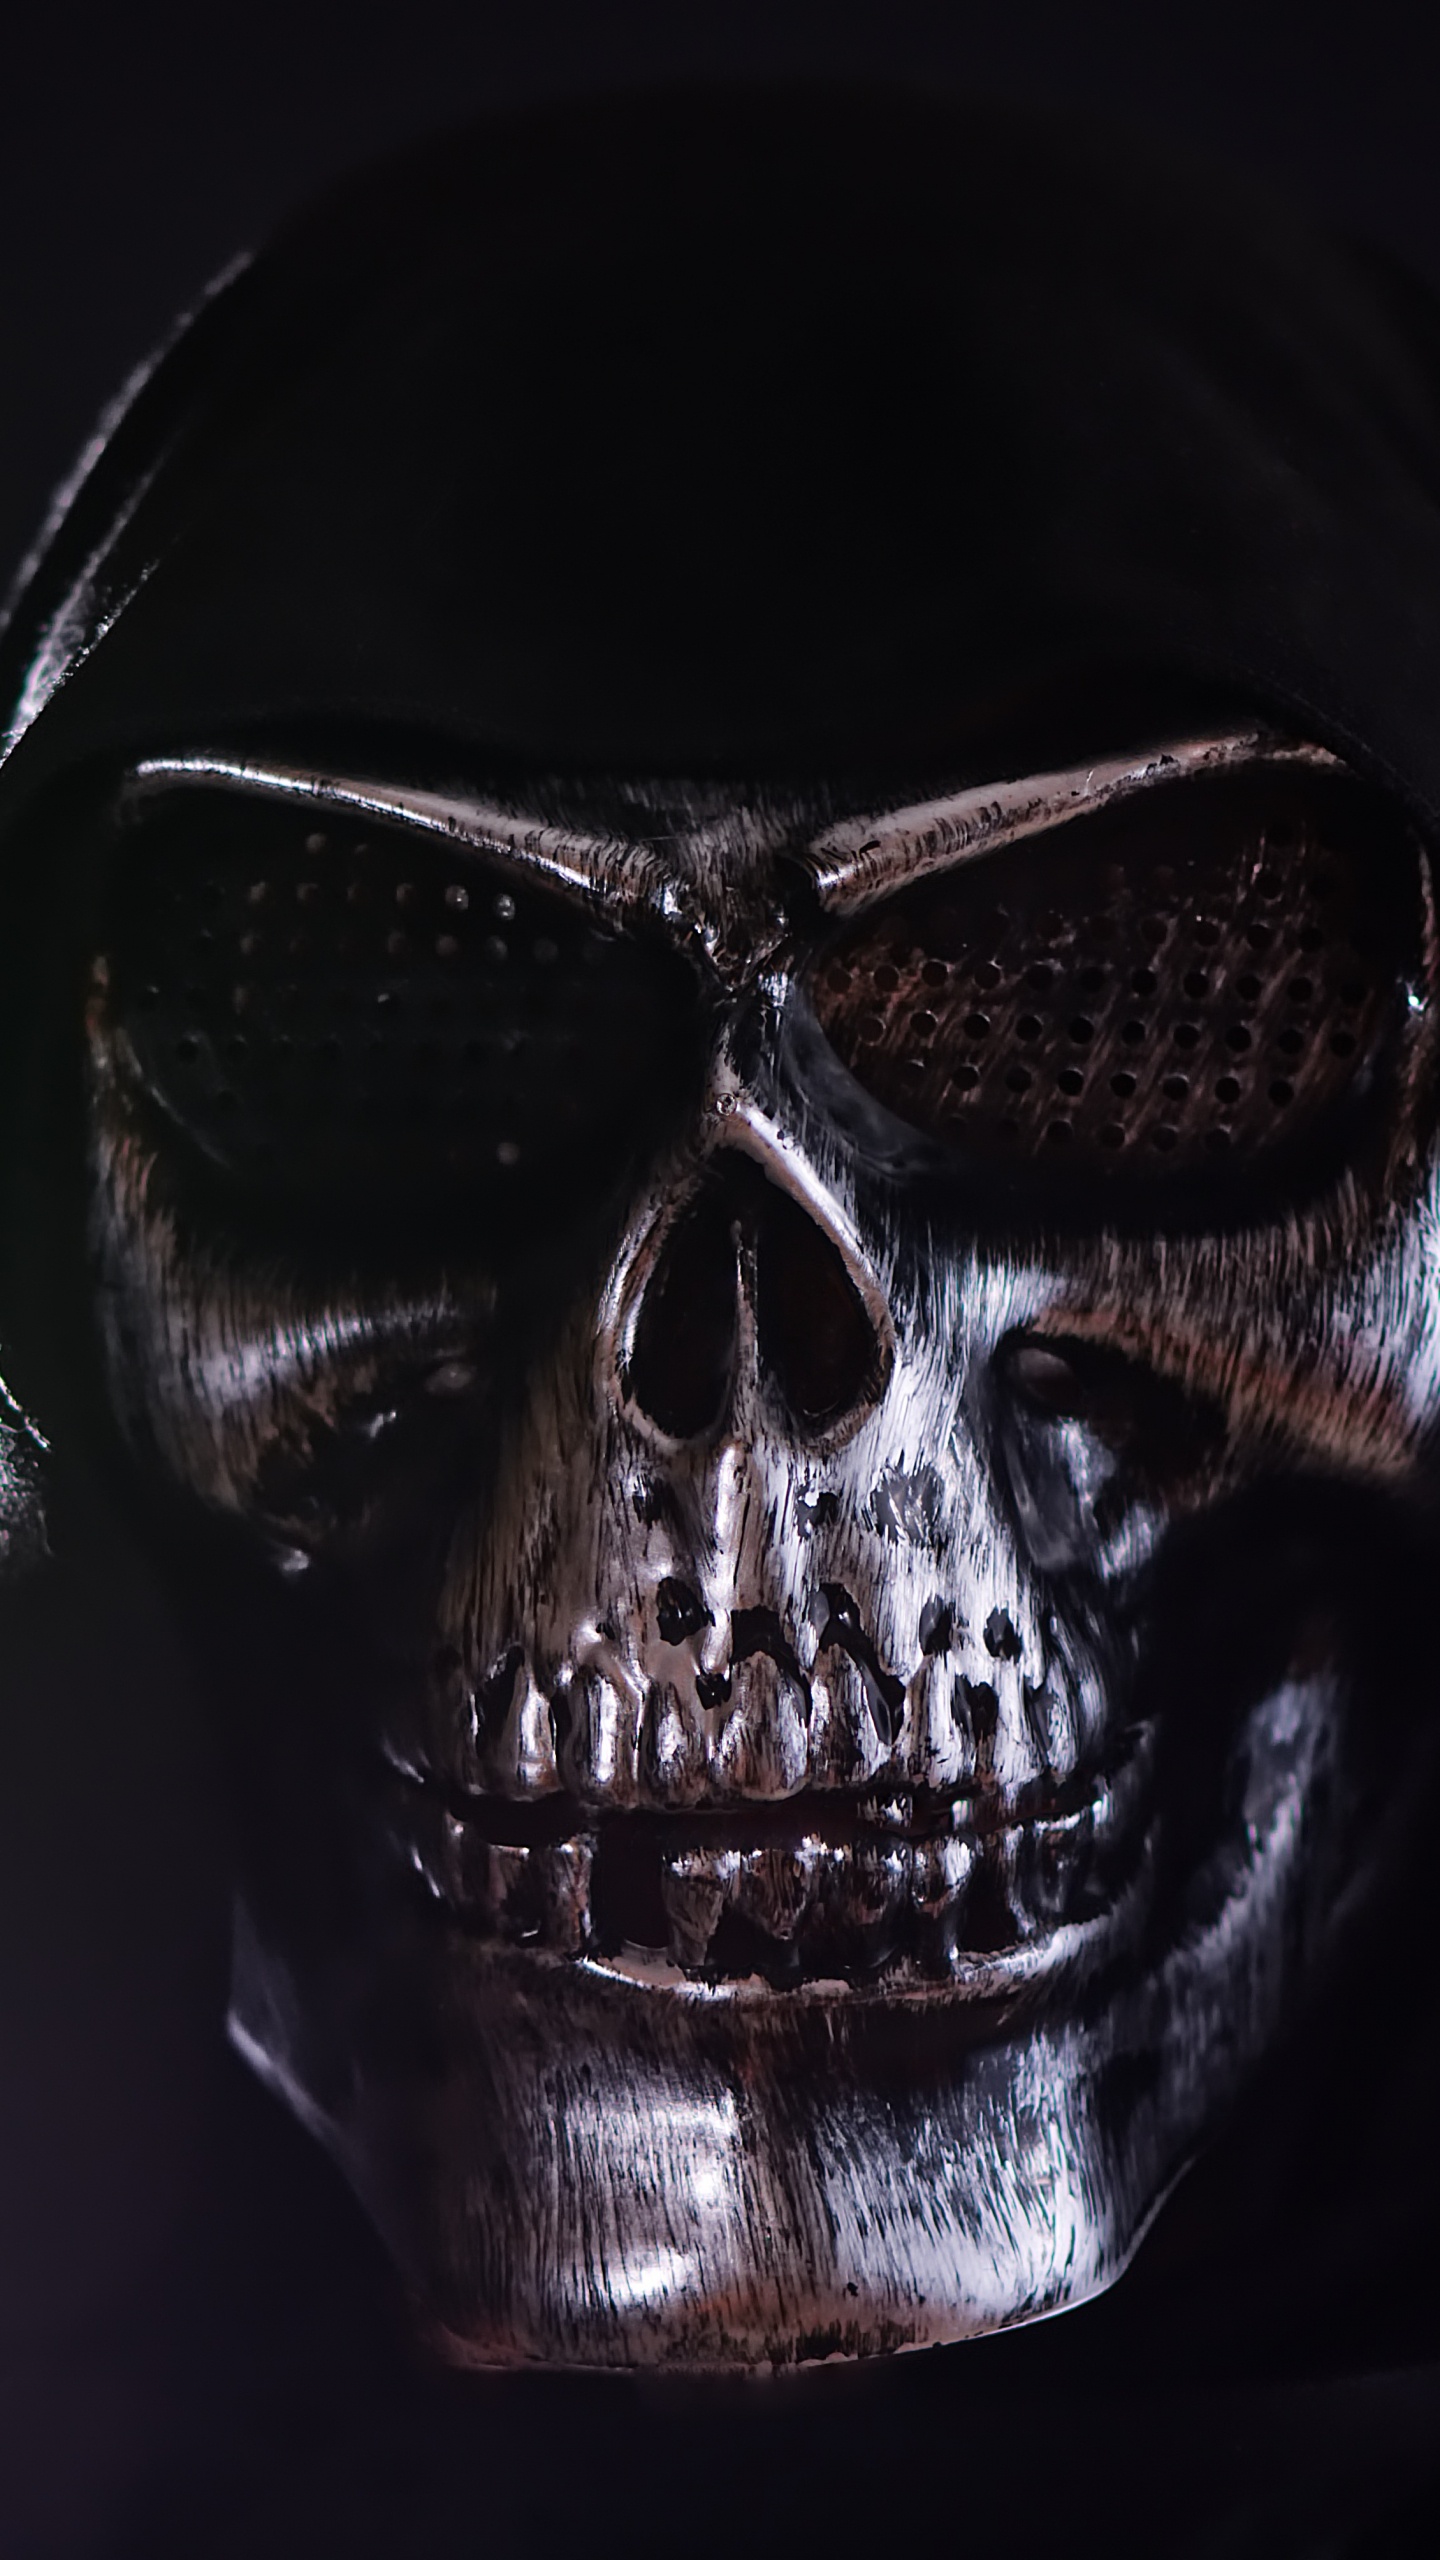 Black and Silver Skull Mask. Wallpaper in 1440x2560 Resolution